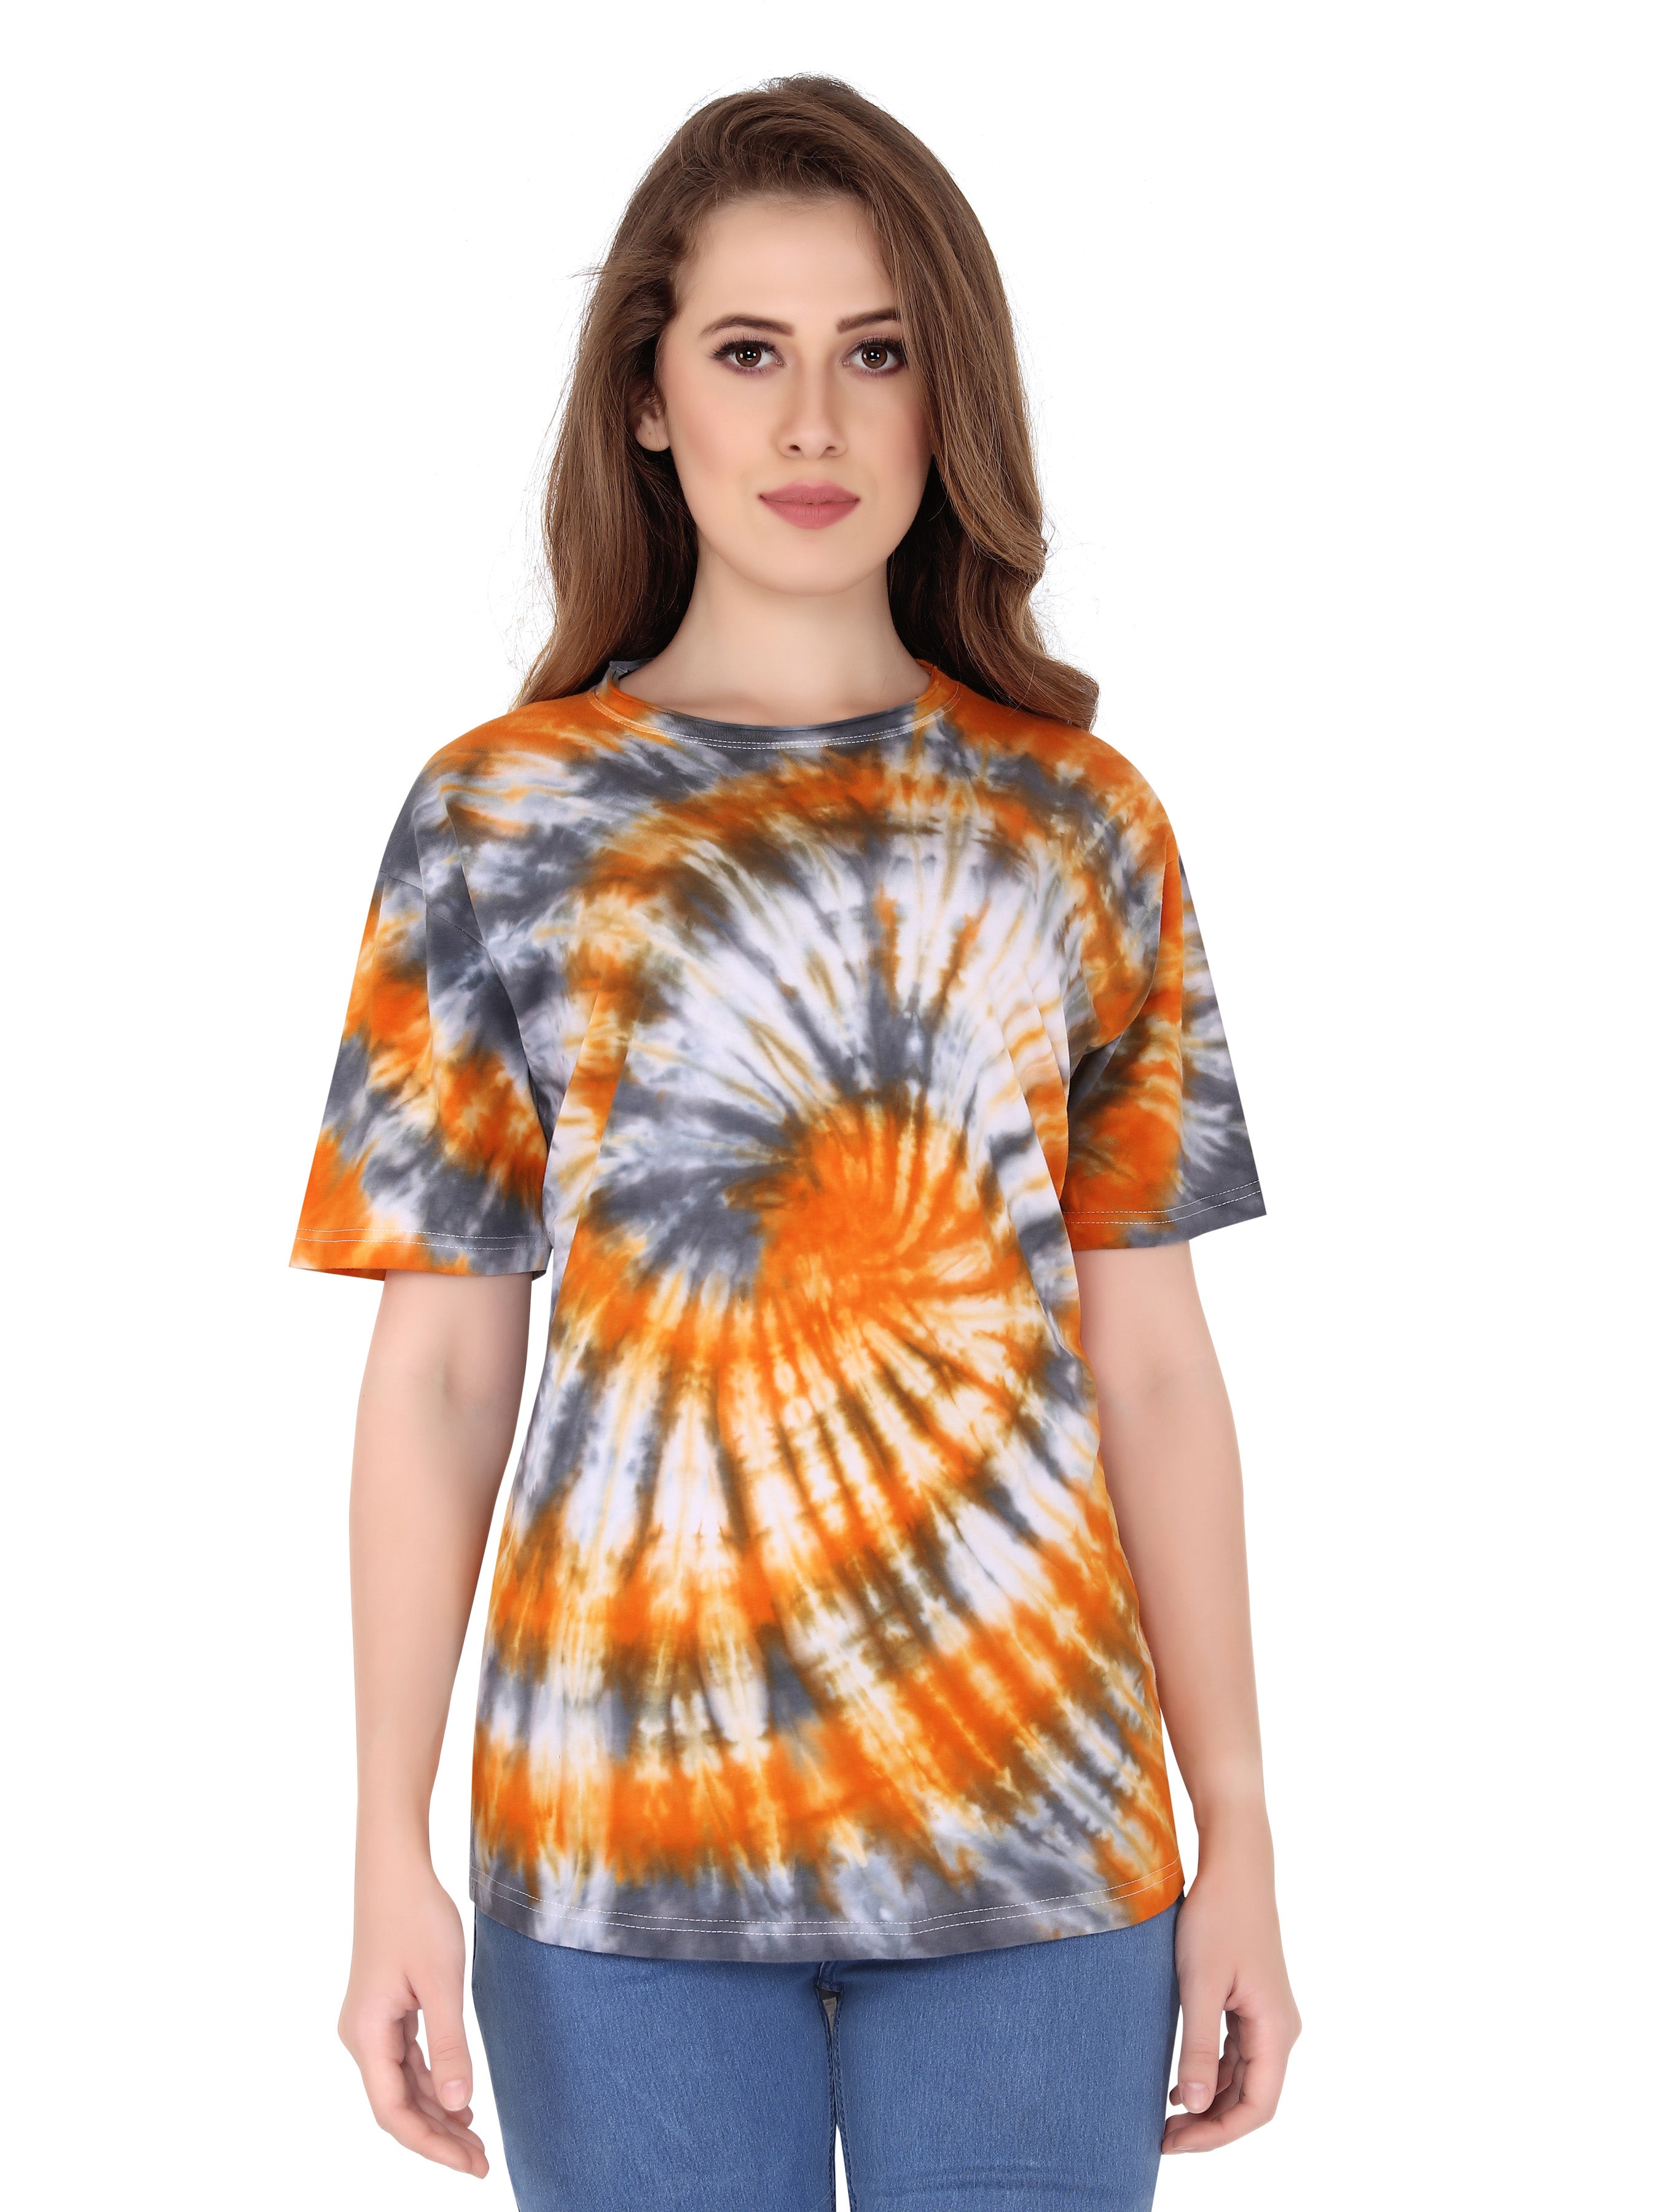 Buy Stories.Label Women Printed Cotton Tie Dye Tshirt in Ribbed Neck  Includes Plus Size, Half Sleeves Casual Fancy Fashion Summer Tops for Girls  Stylish Western (Orange, S) at